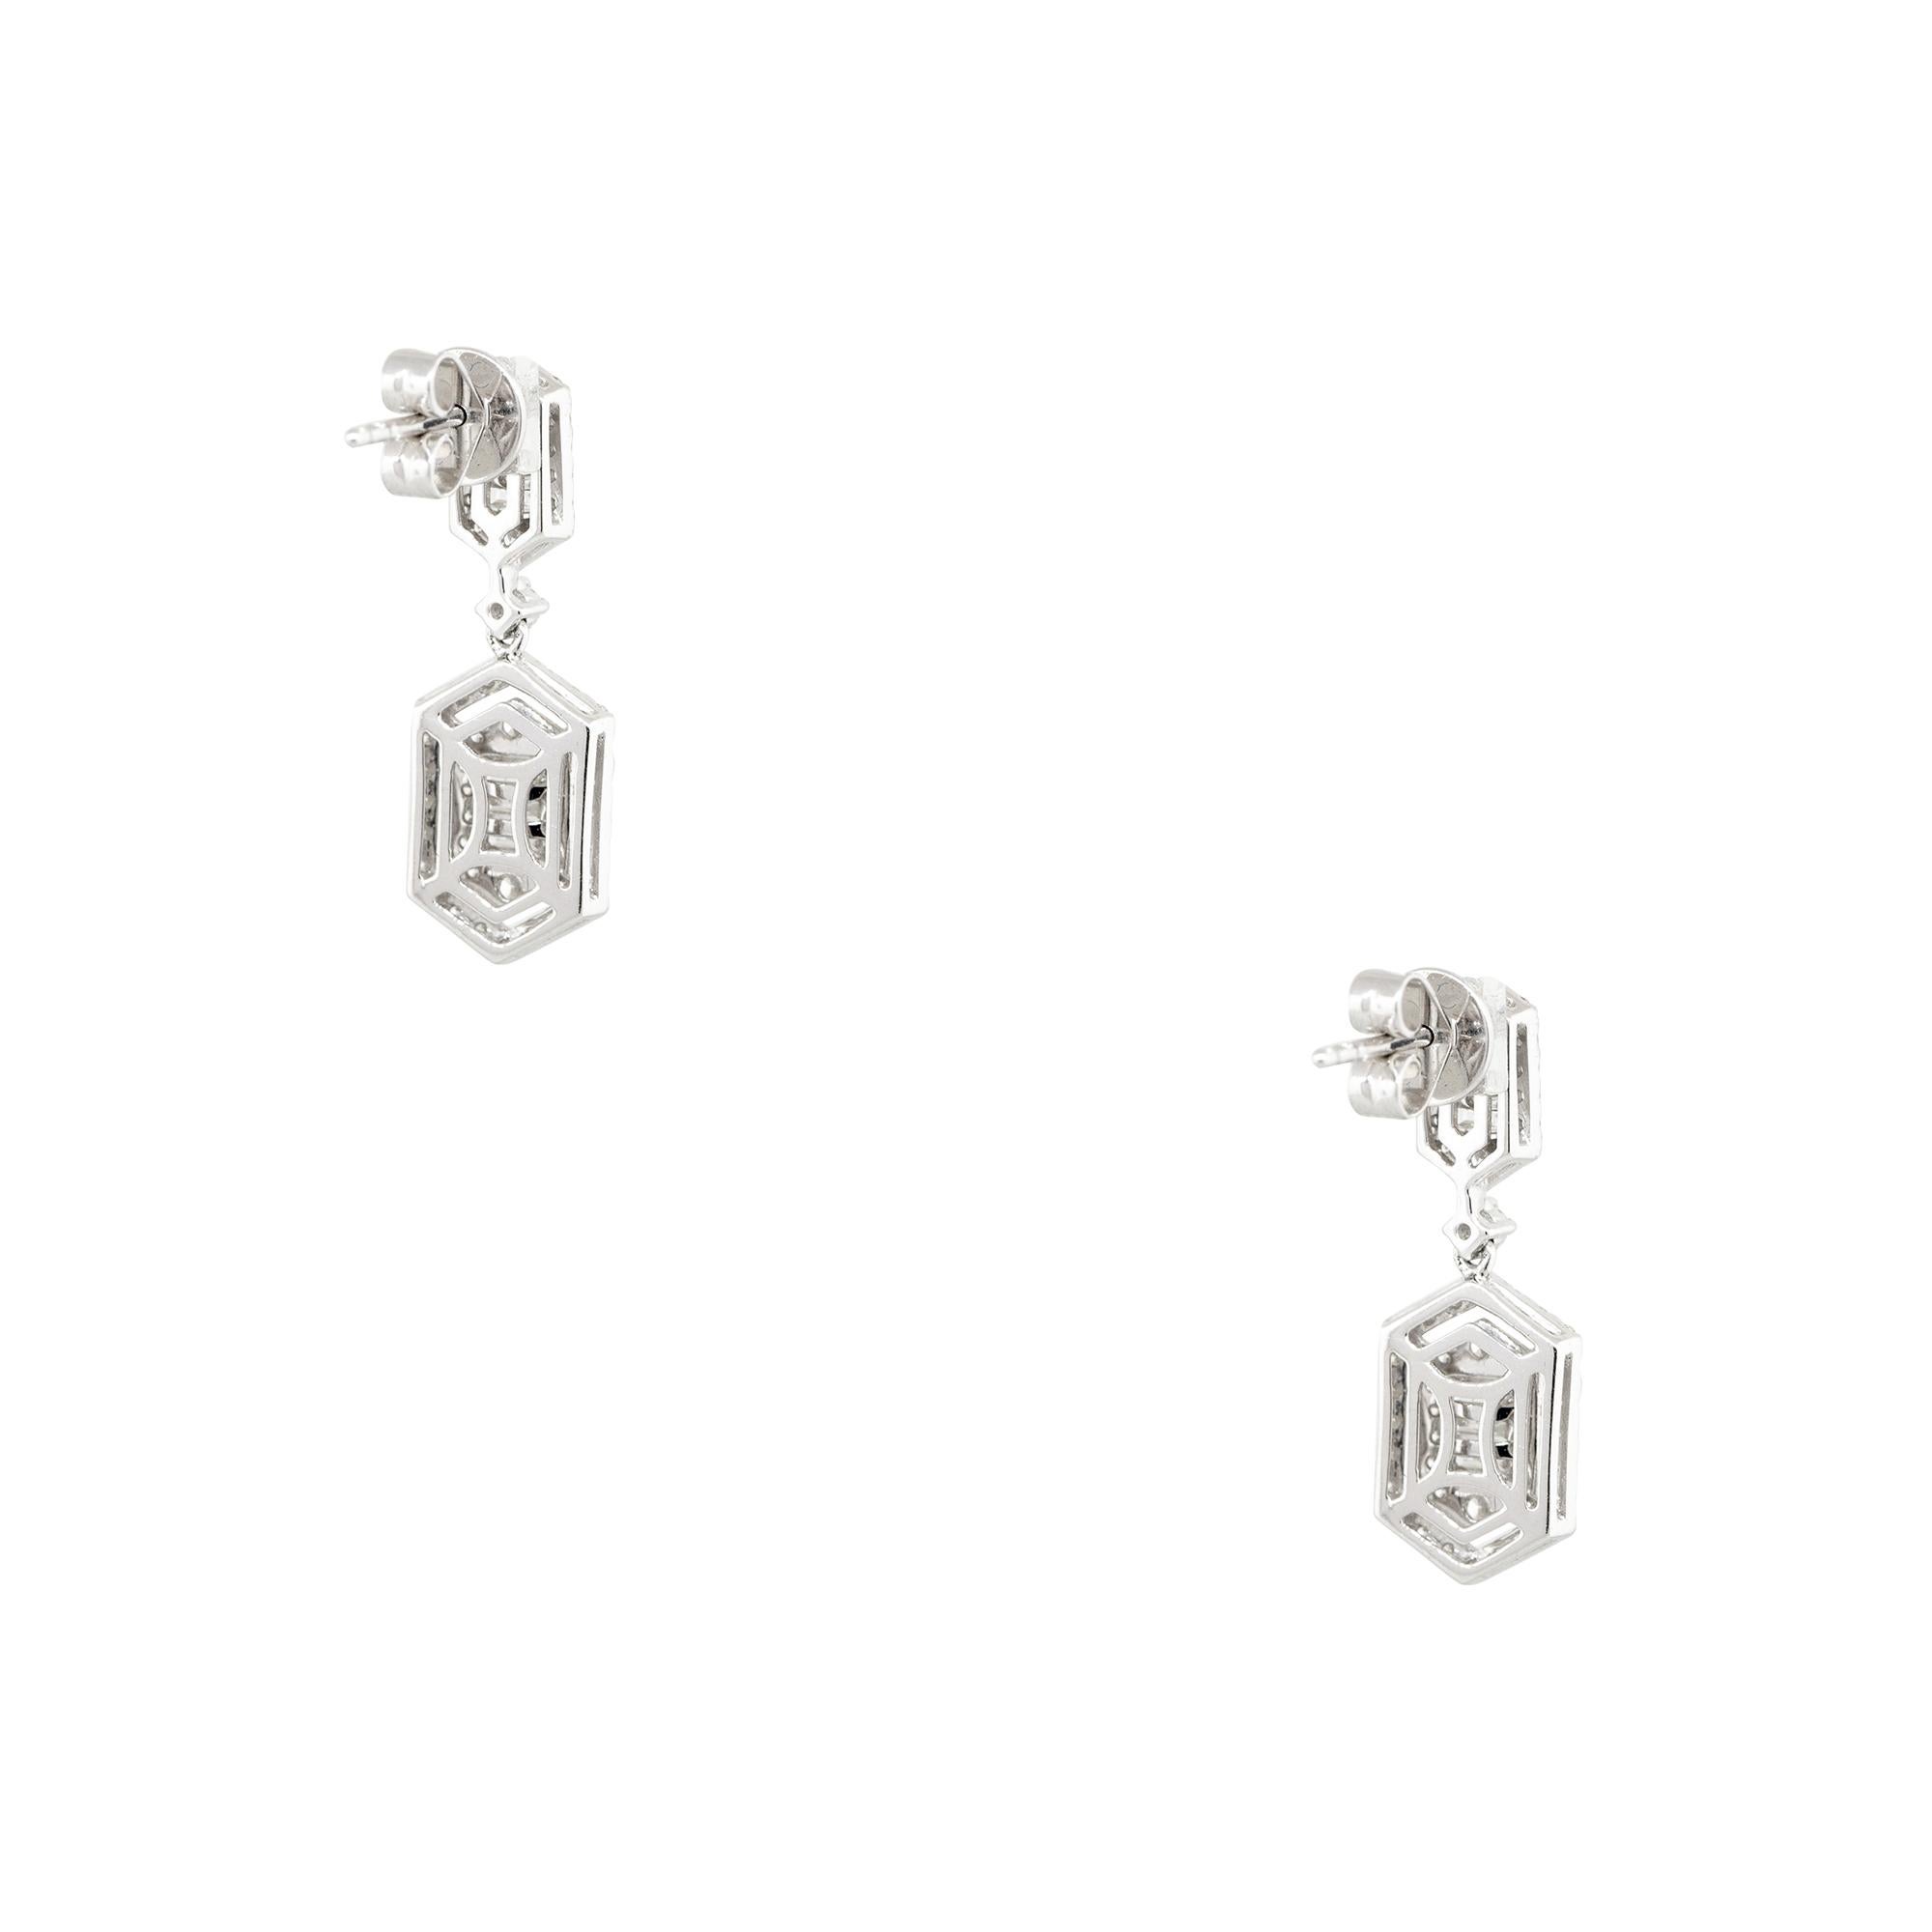 18k White Gold 1.2ctw Multi-Shape Mosaic Diamond Drop Earrings
Material: 18k White Gold
Diamond Details: Diamonds are approximately 1.2ctw of Round Brilliant cut Diamonds. There are 118 diamonds total and diamonds are approximately F/G in color and